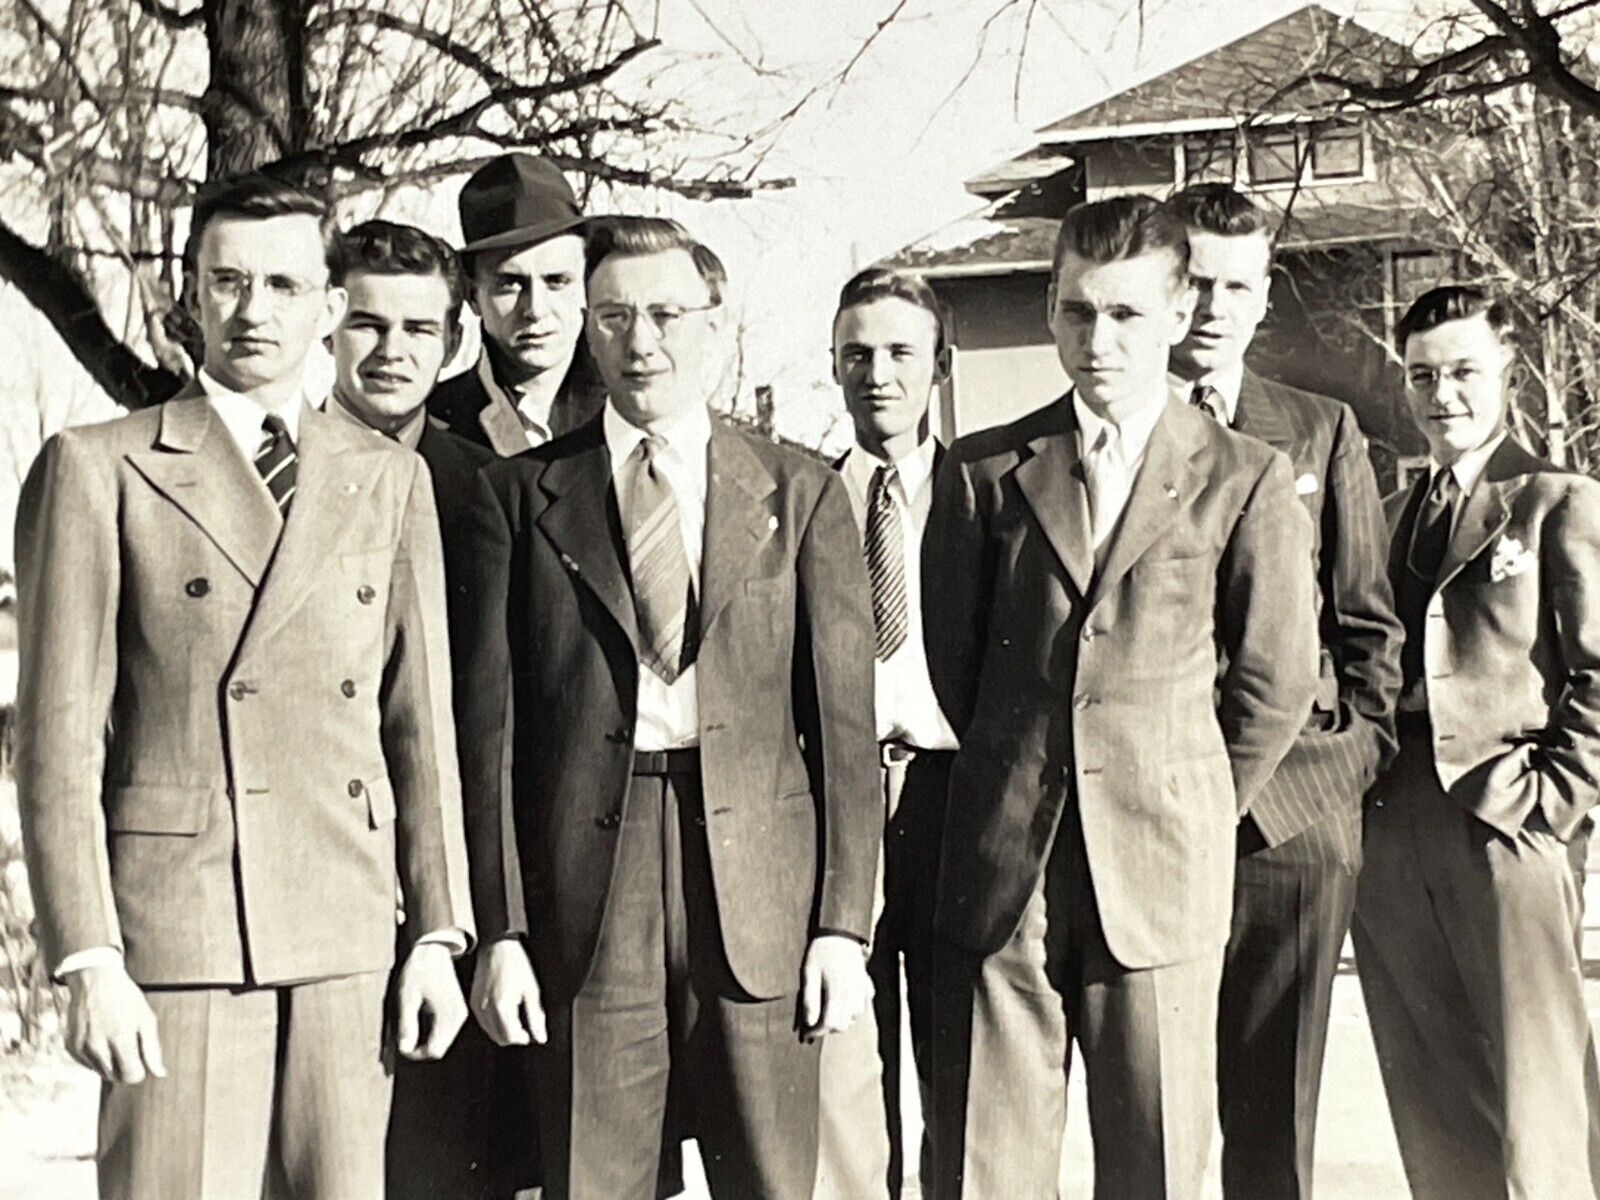 UF Photograph Group Young Men Suits College Guys 1940s